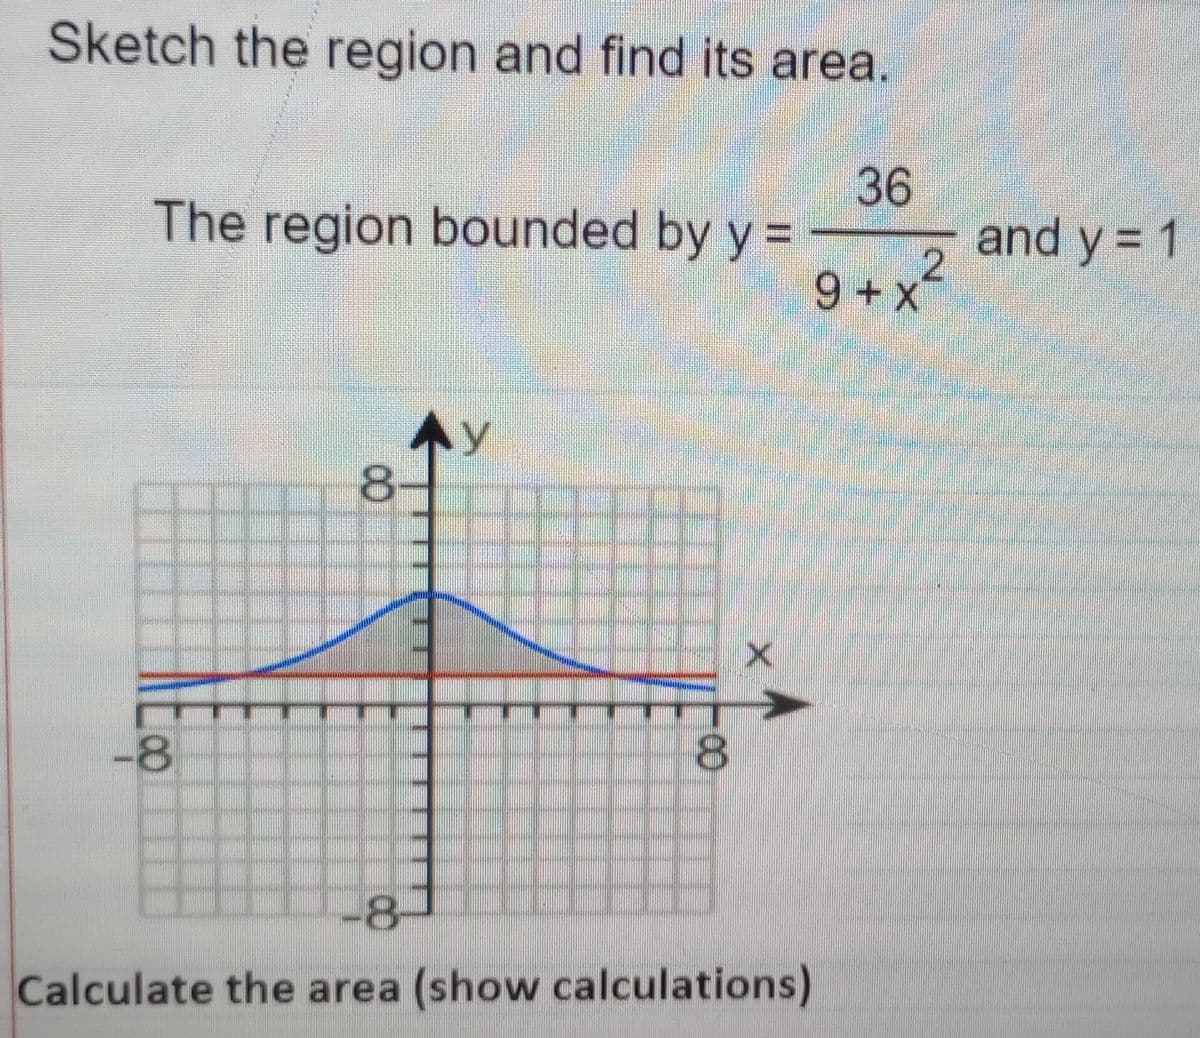 Sketch the region and find its area.
The region bounded by y =
-8
00
Ау
8
8
Calculate the area (show calculations)
36
2
9+x
and y = 1